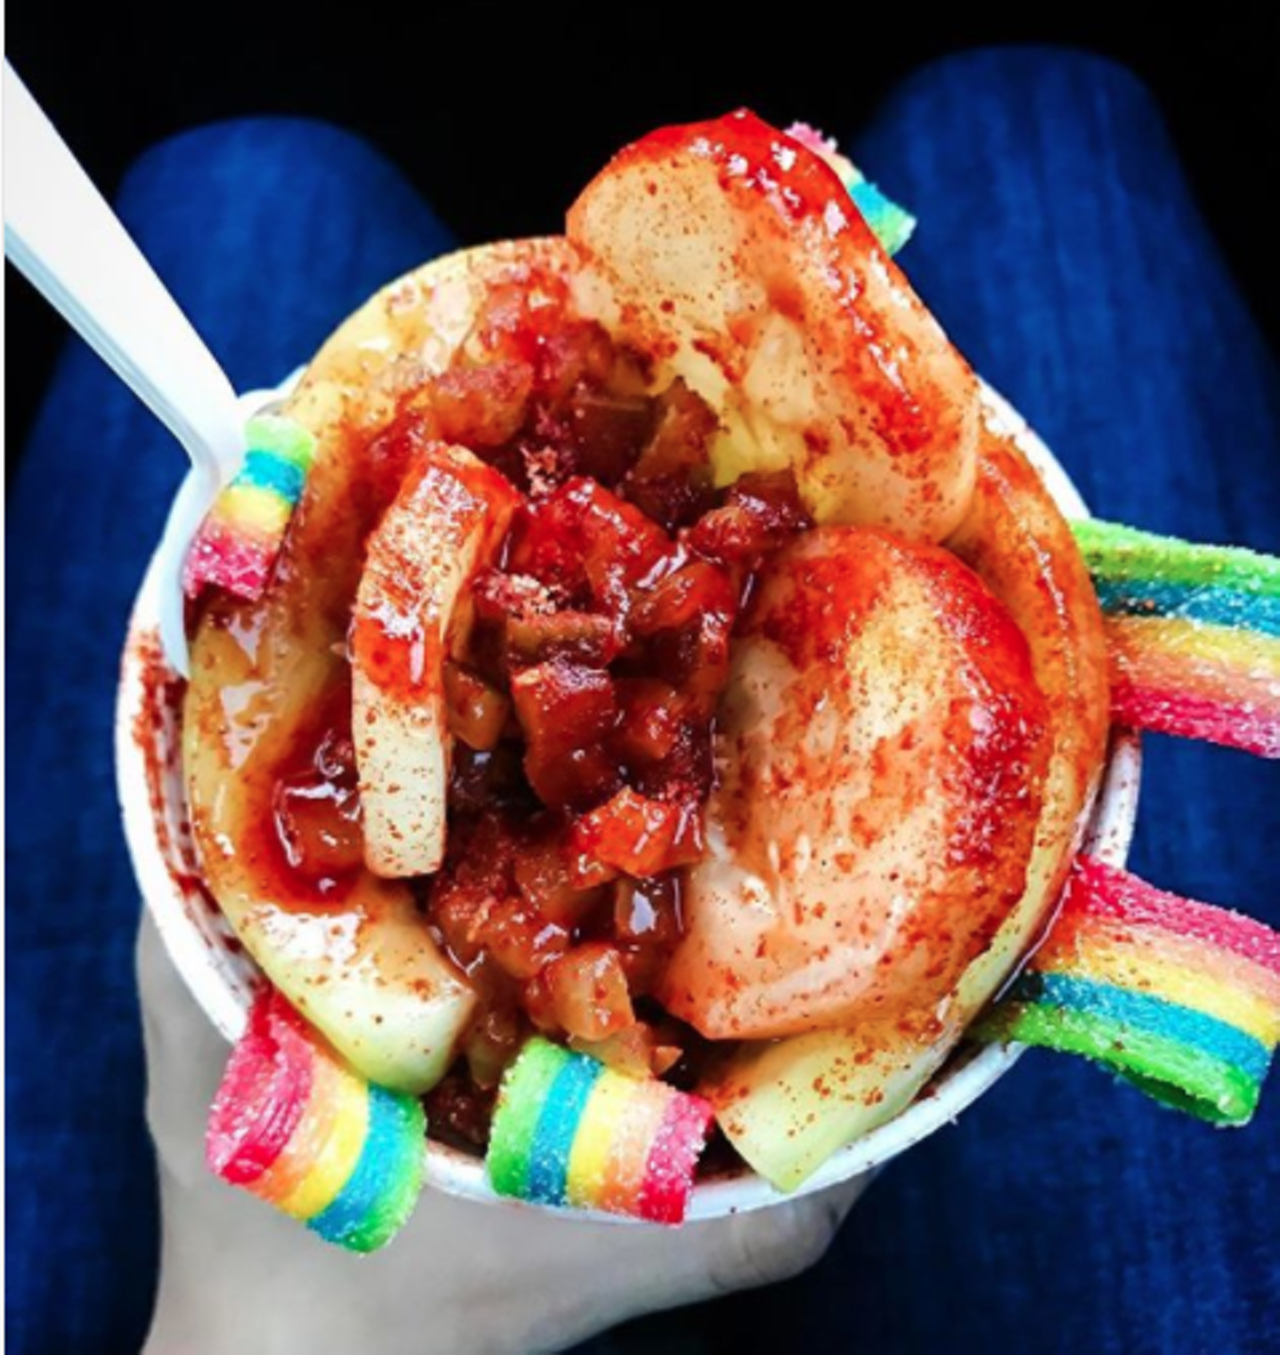 Tropic Express
10167 Culebra Road, (210) 522-0608
It's hard to find sinful snacks like these along Loop 1604, but Tropic Express comes through whenever you have an antojo for a raspa or corn in a cup.
Photo via erikadb37 / Instagram